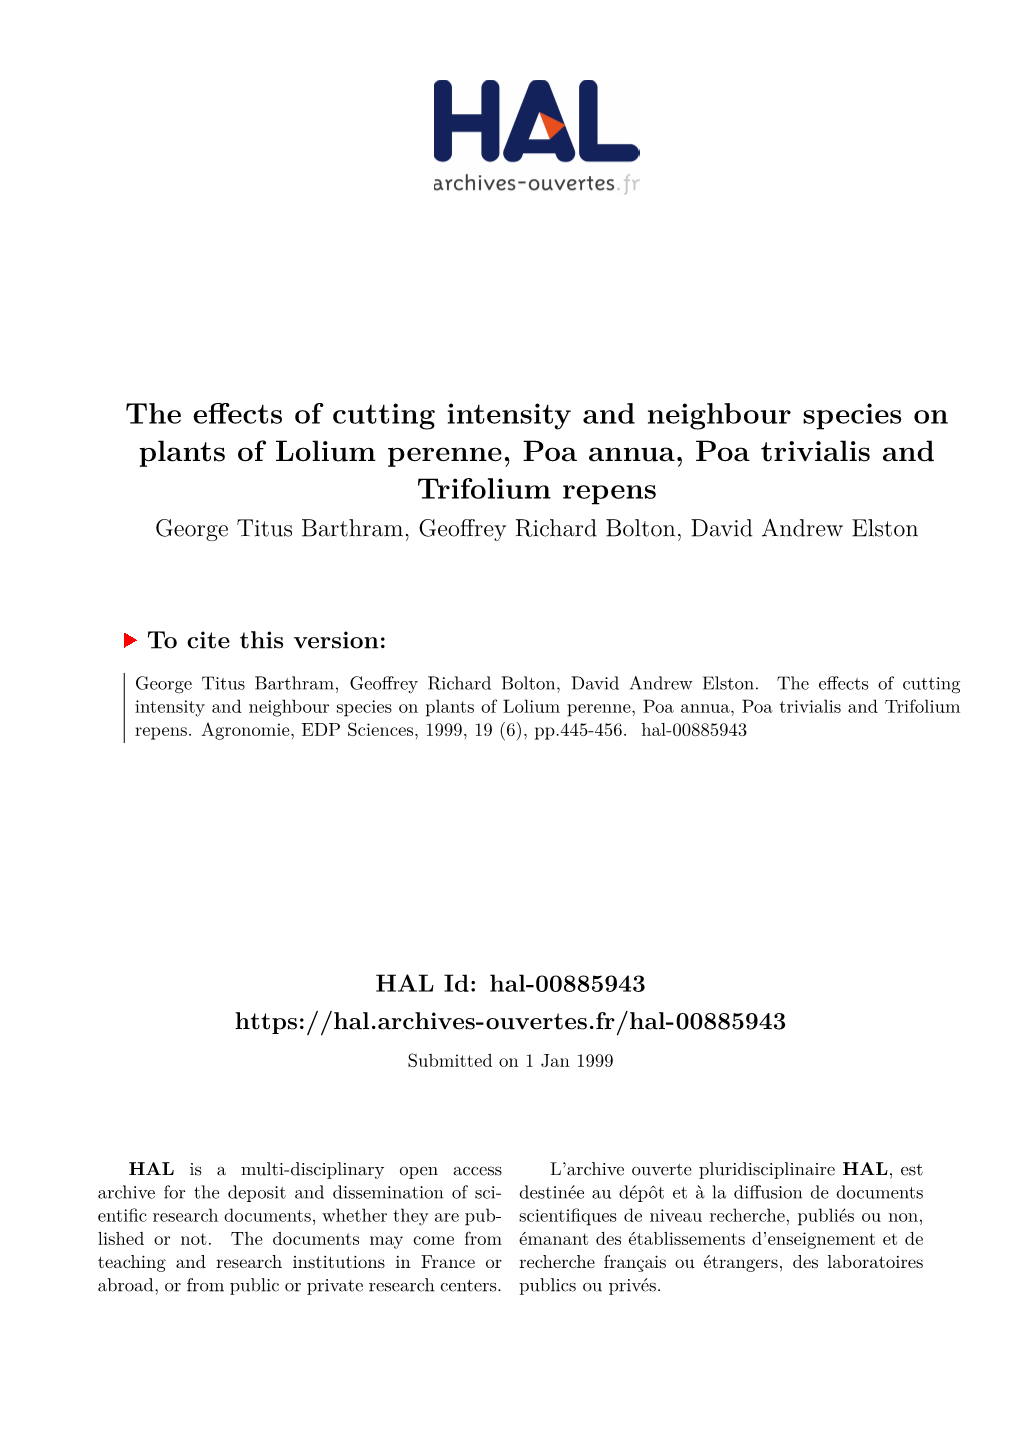 The Effects of Cutting Intensity and Neighbour Species on Plants Of